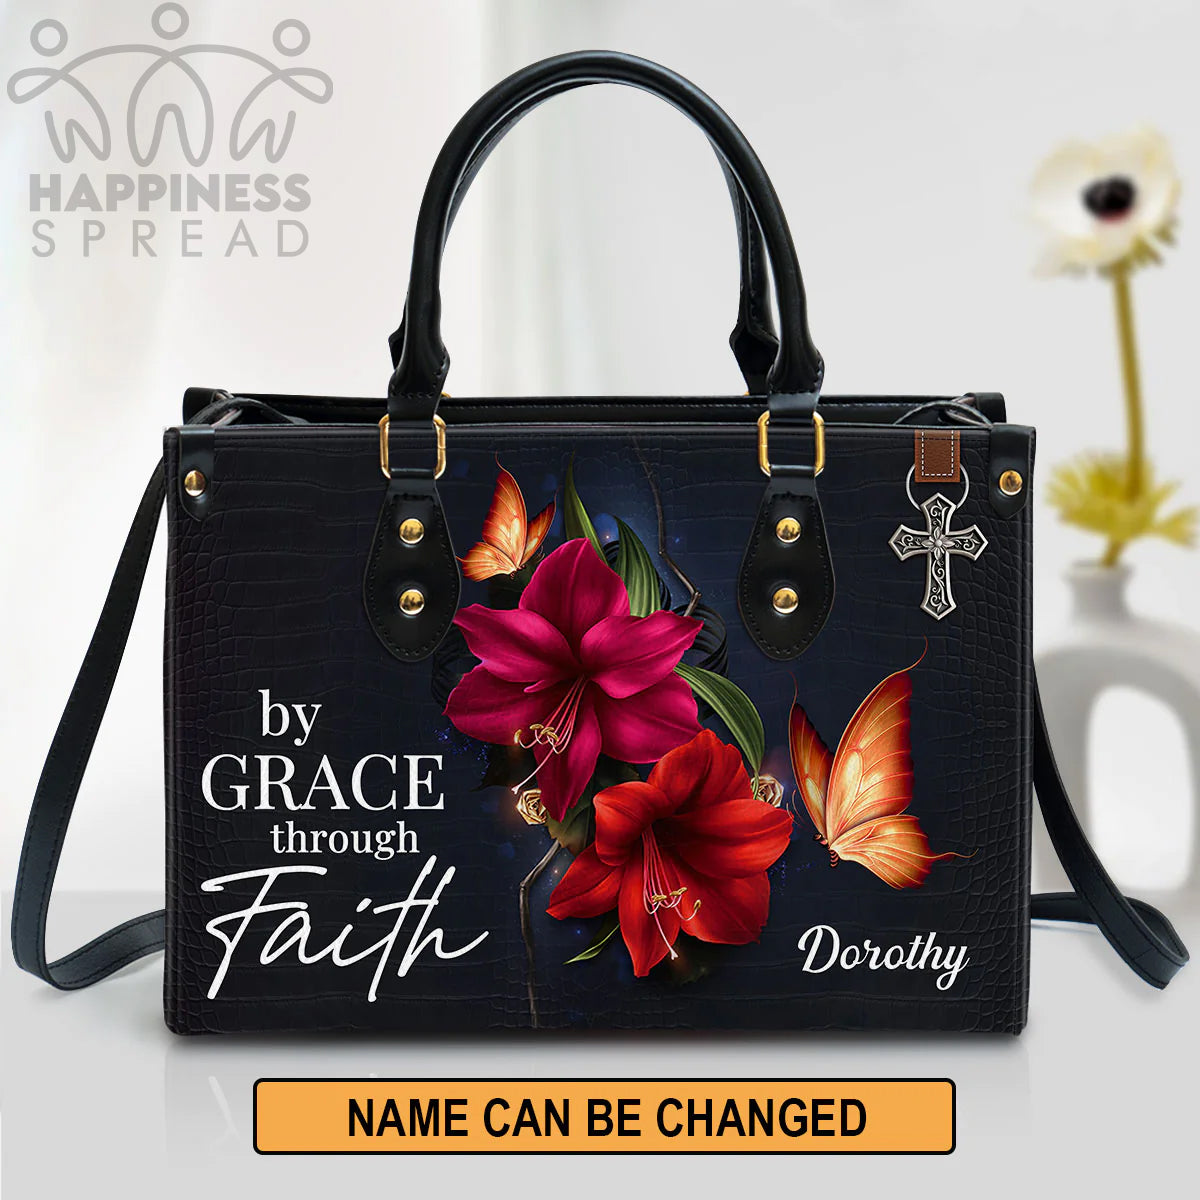 Christianart Handbag, Personalized Hand Bag, By Grace Through Faith, Personalized Gifts, Gifts for Women. - Christian Art Bag